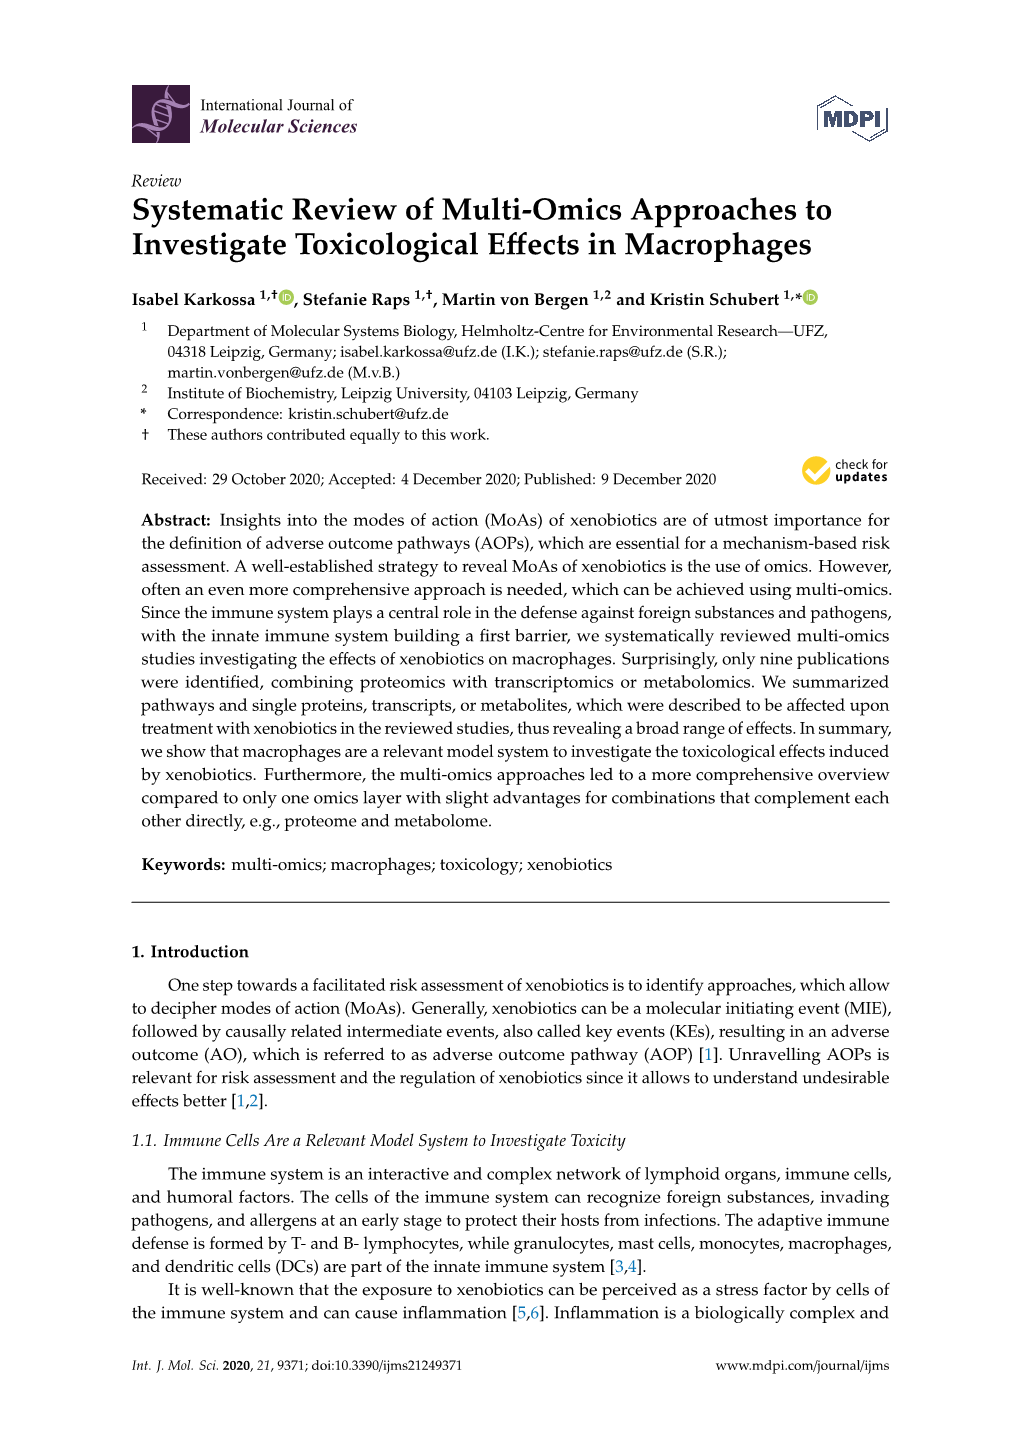 Systematic Review of Multi-Omics Approaches to Investigate Toxicological Eﬀects in Macrophages